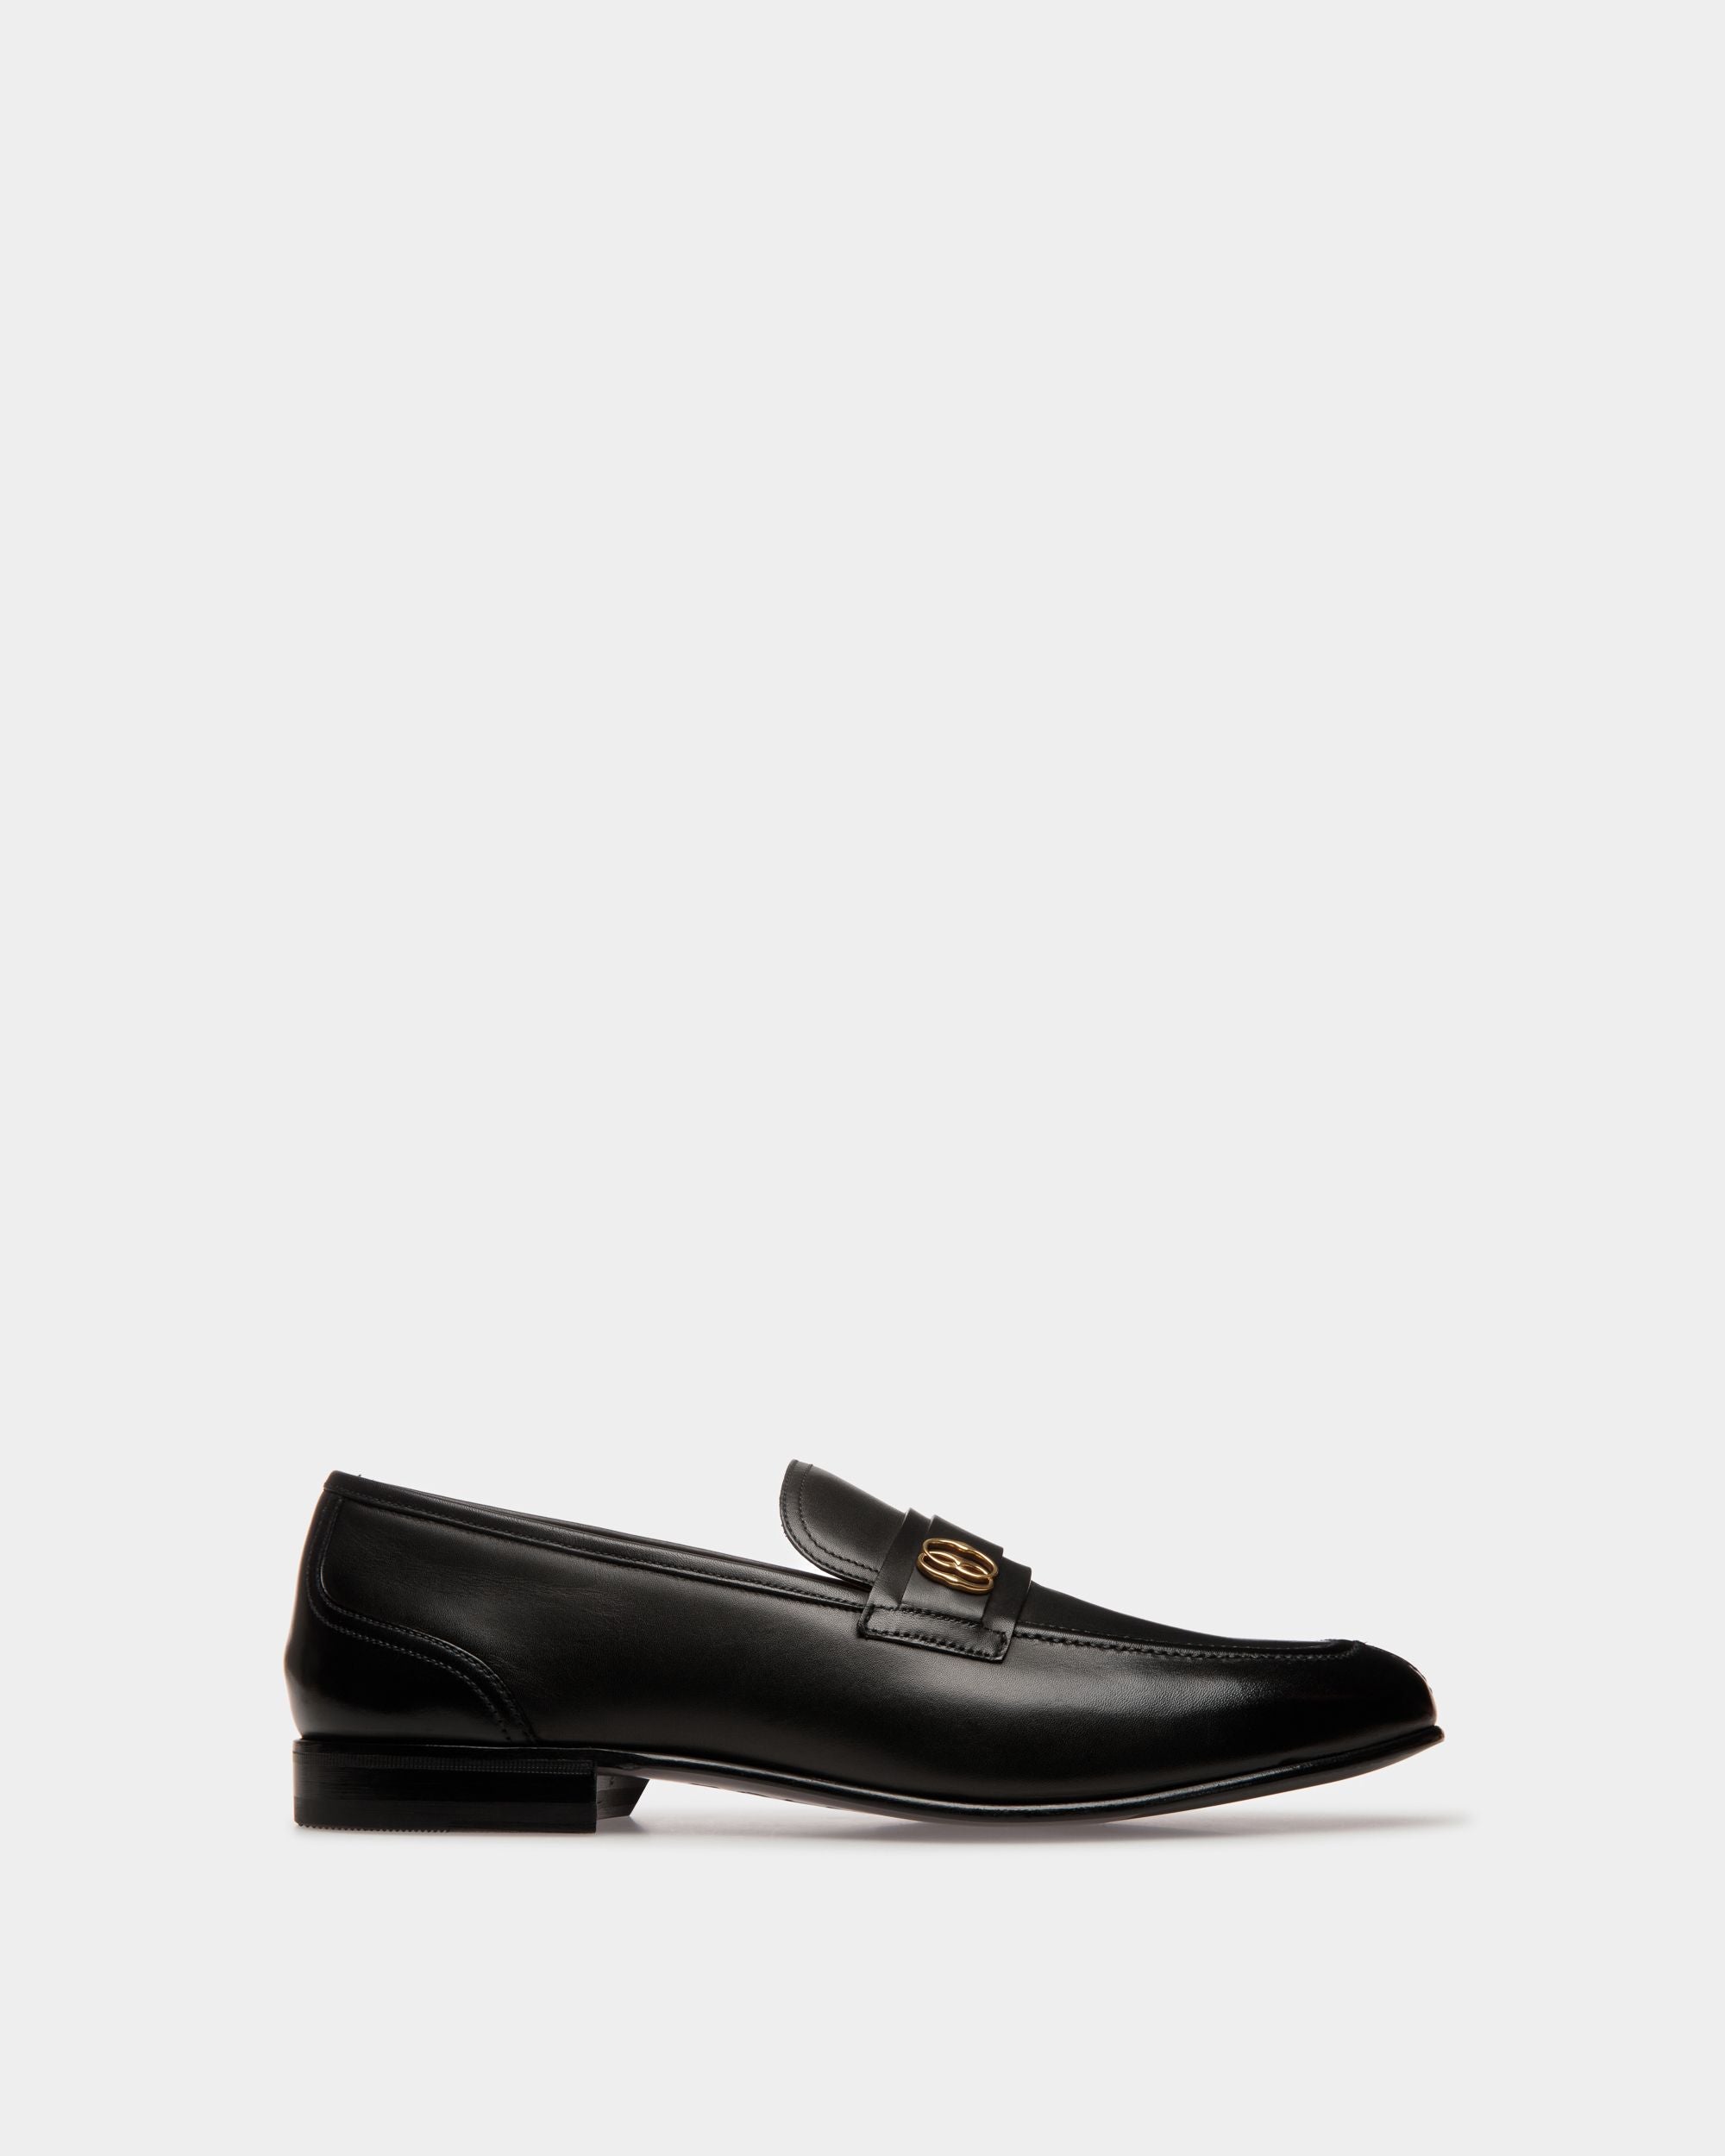 Sadei | Men's Loafers | Black Leather | Bally | Still Life Side